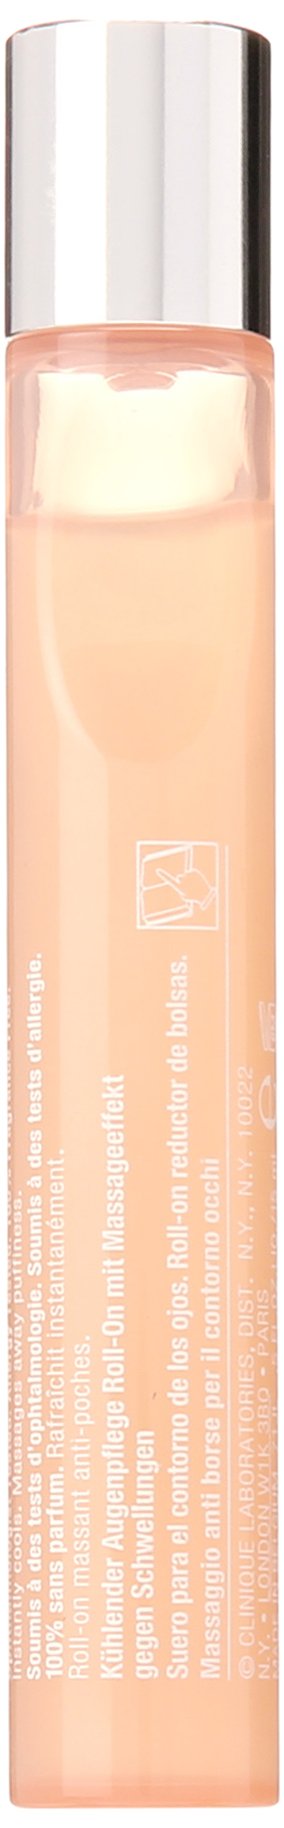 Clinique All About Eyes Serum For Her 15ml - NewNest Australia